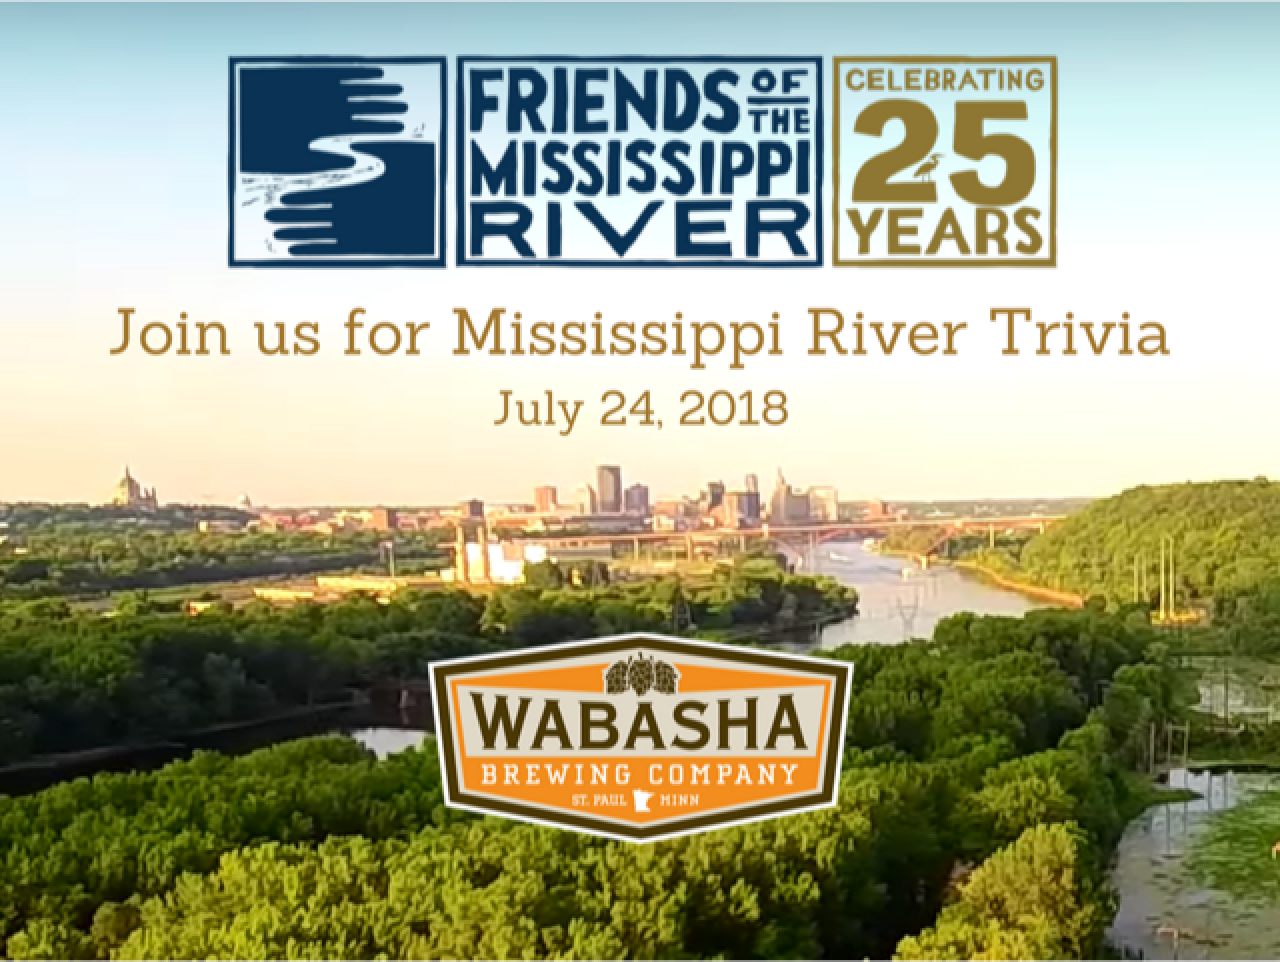 Join us for Mississippi River Trivia at Wabasha Brewing Company Taproom